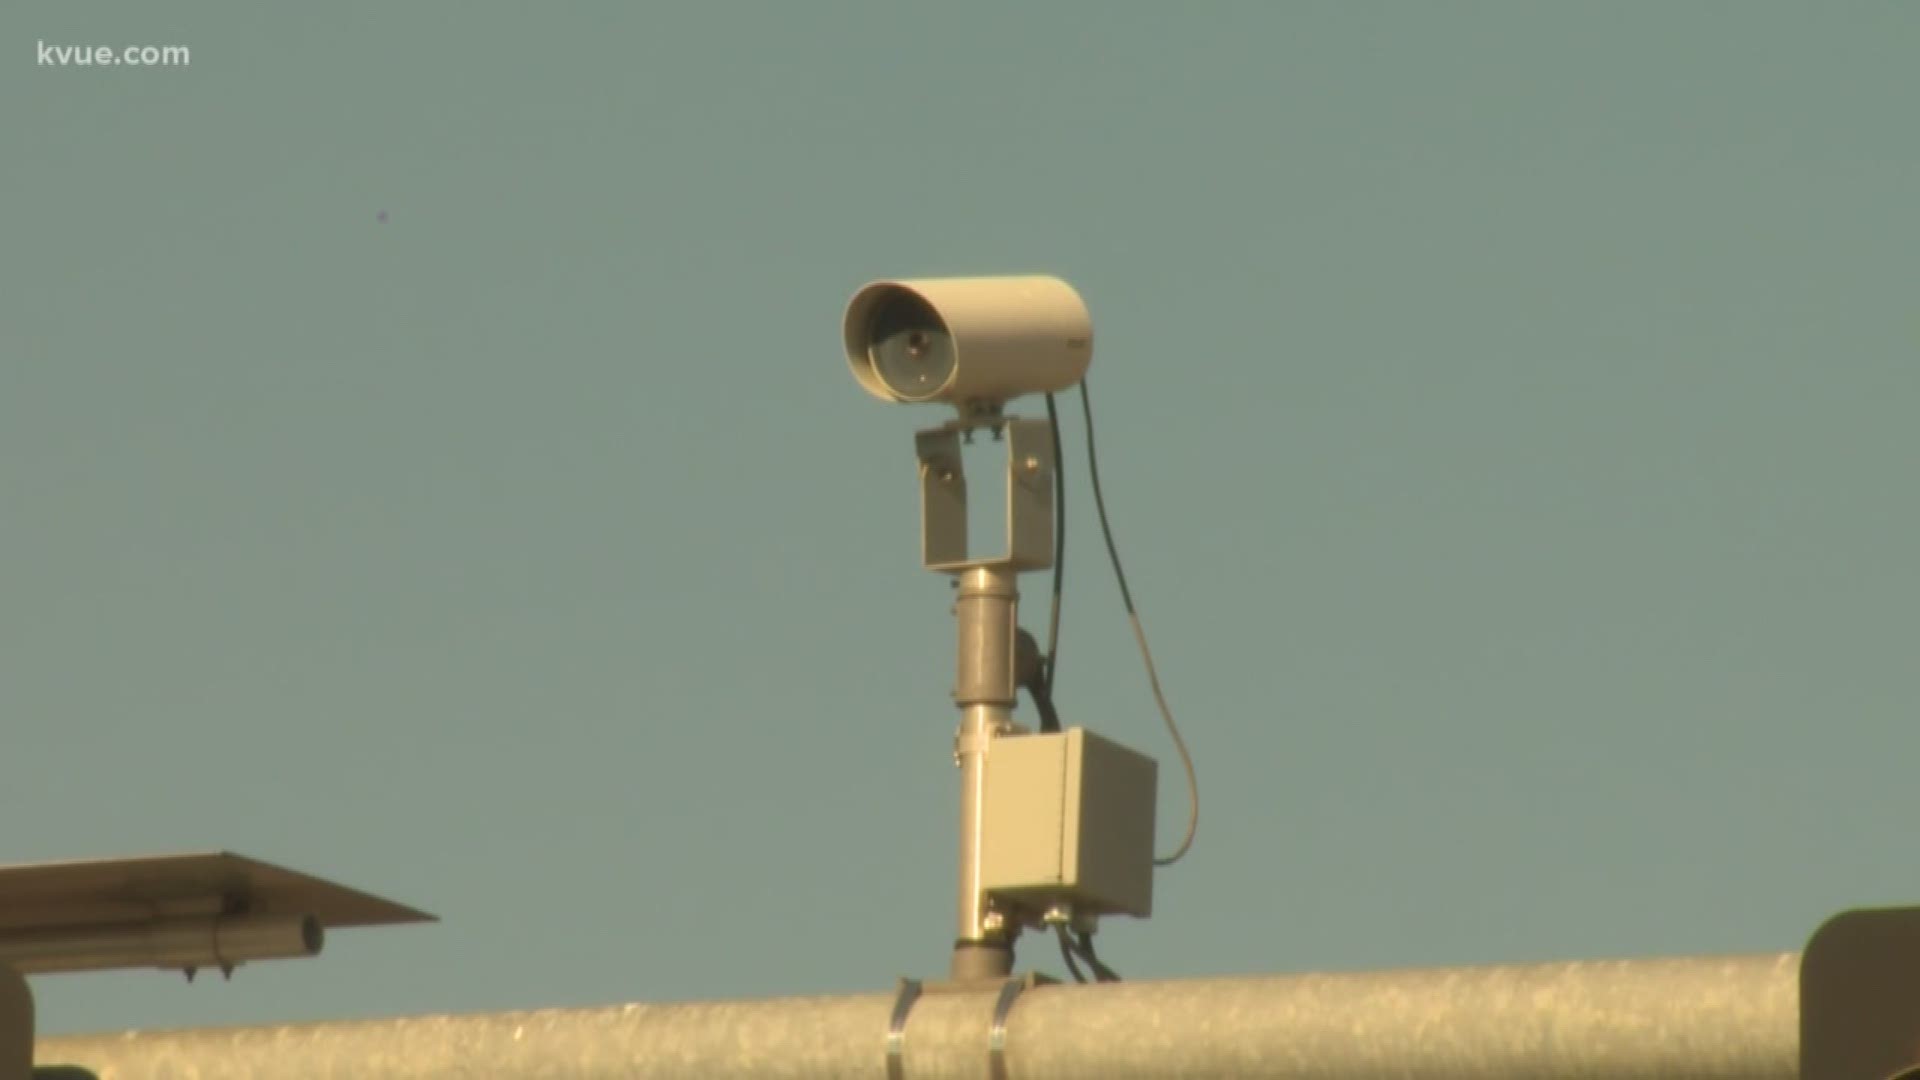 Gov. Abbott wants to ban red light cameras in Texas